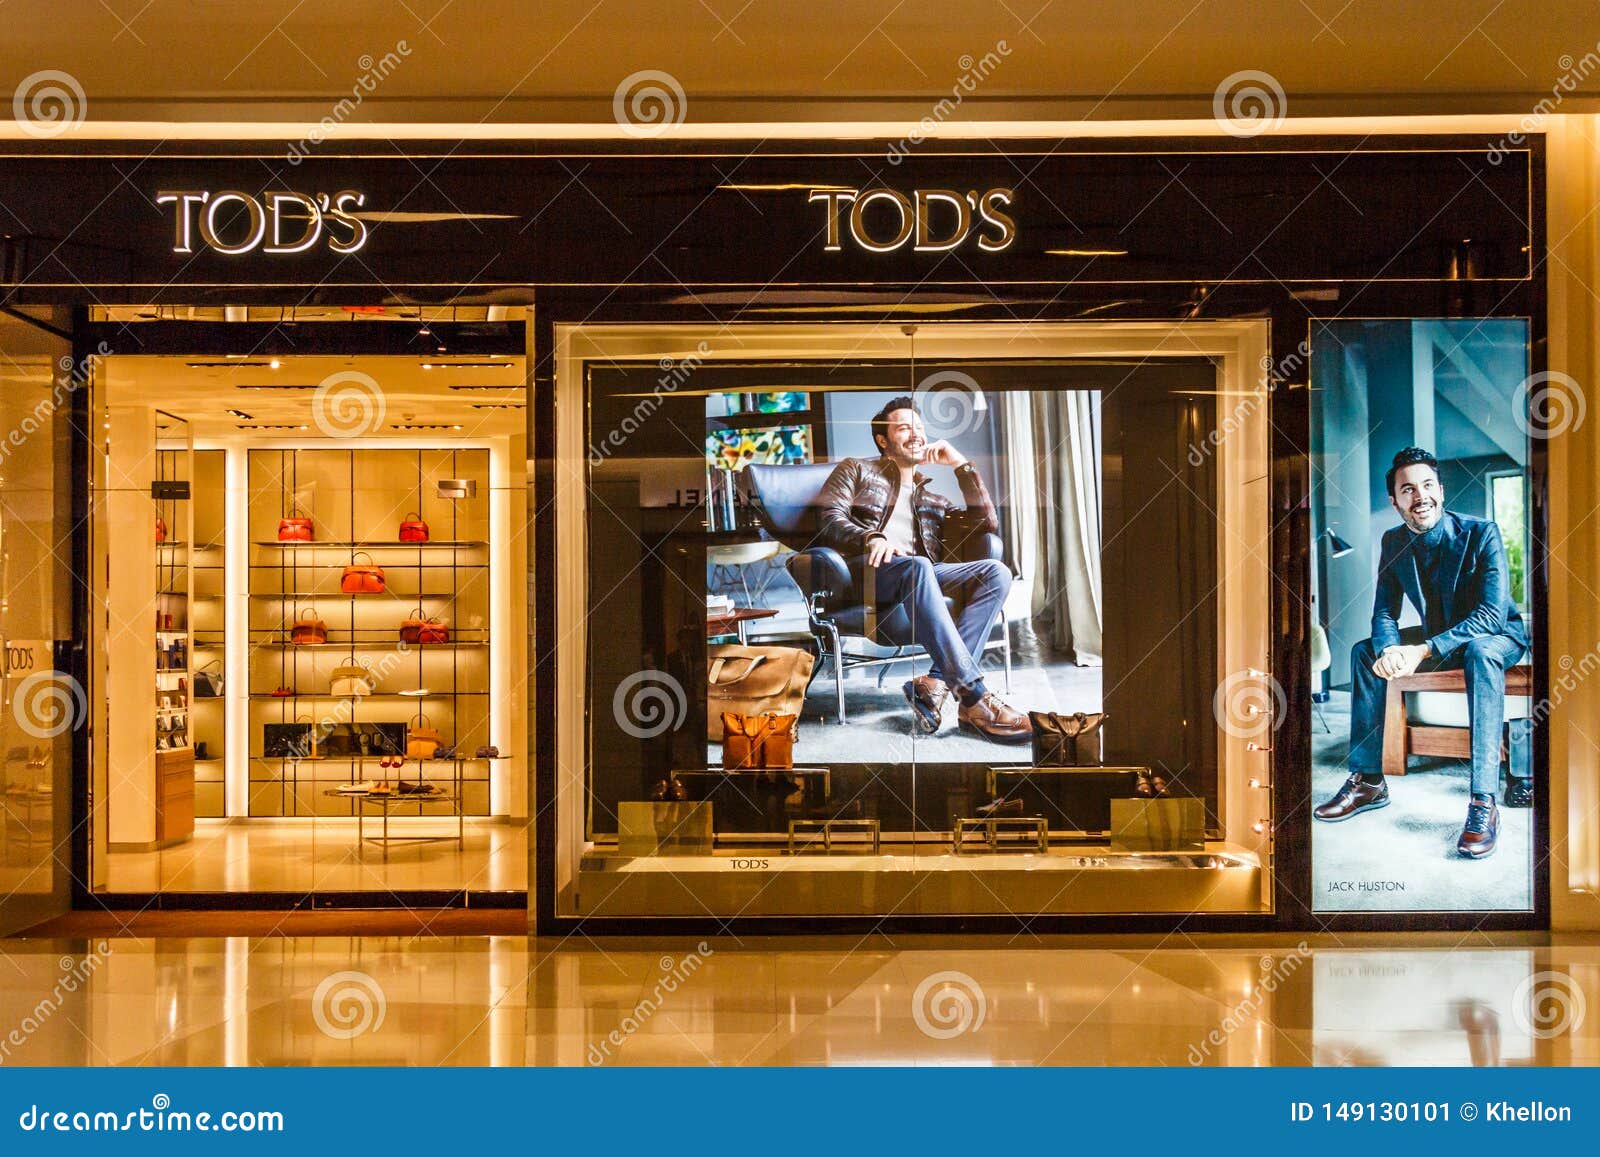 A Tods Store in a Shopping Mall Editorial Photo - Image of trendy,  interior: 149130101